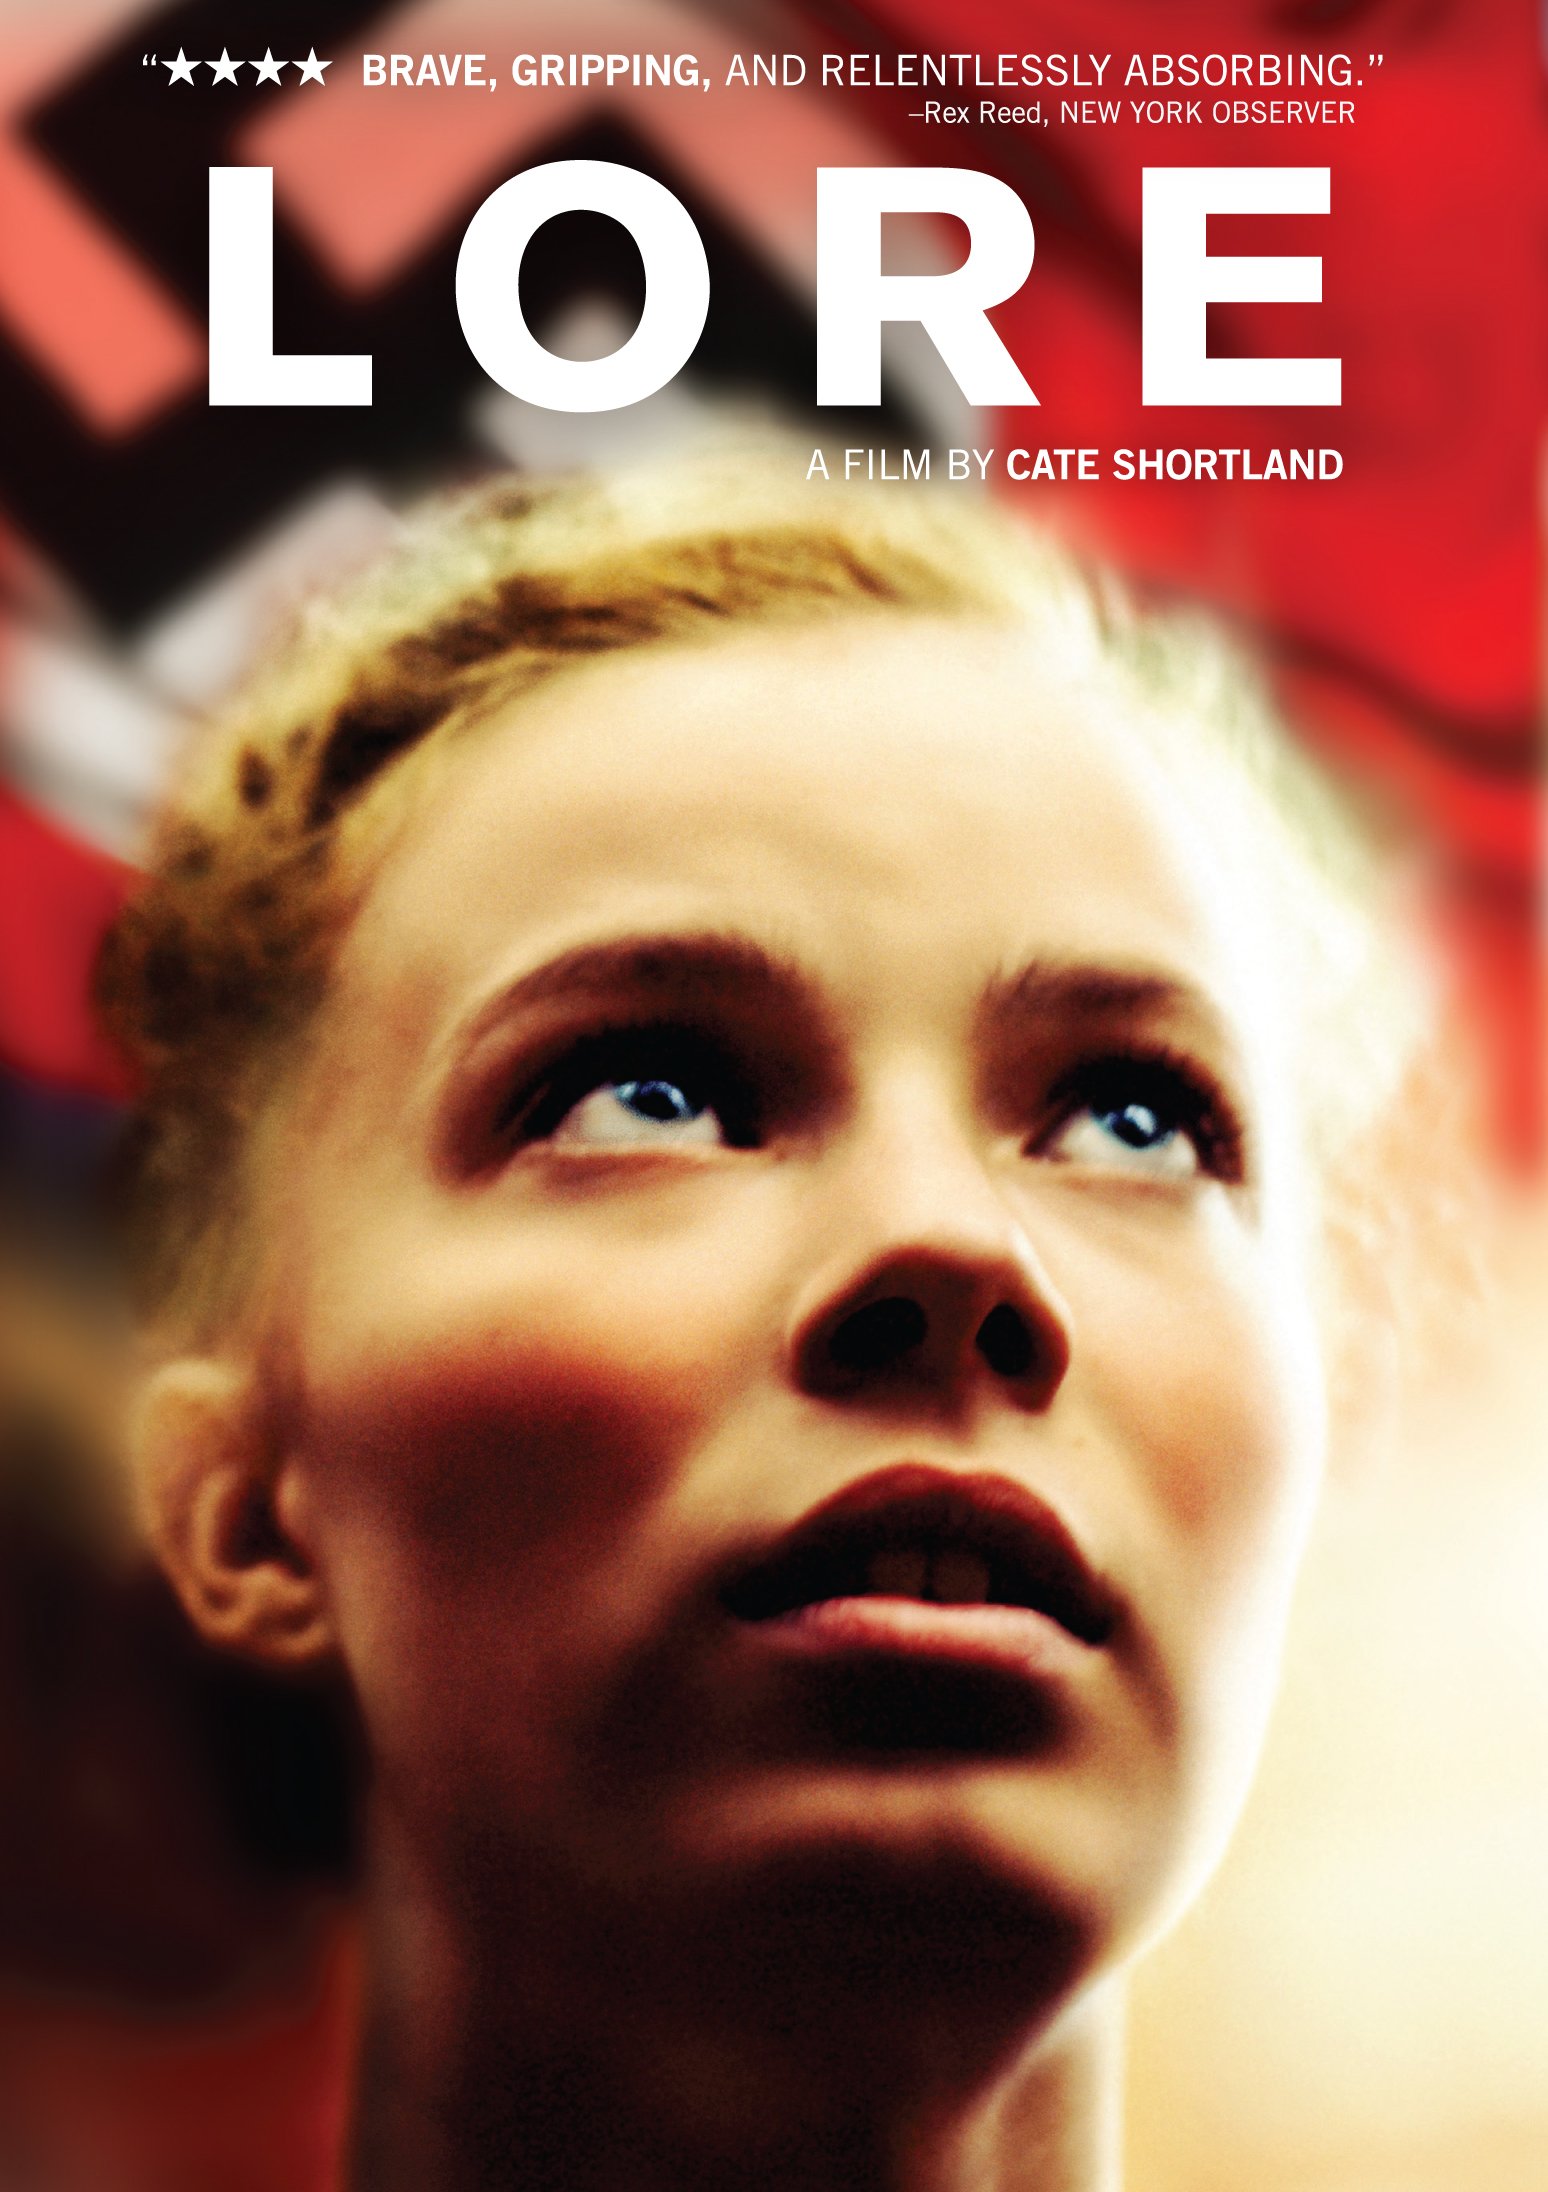 Lore DVD Release Date May 28, 20131548 x 2192